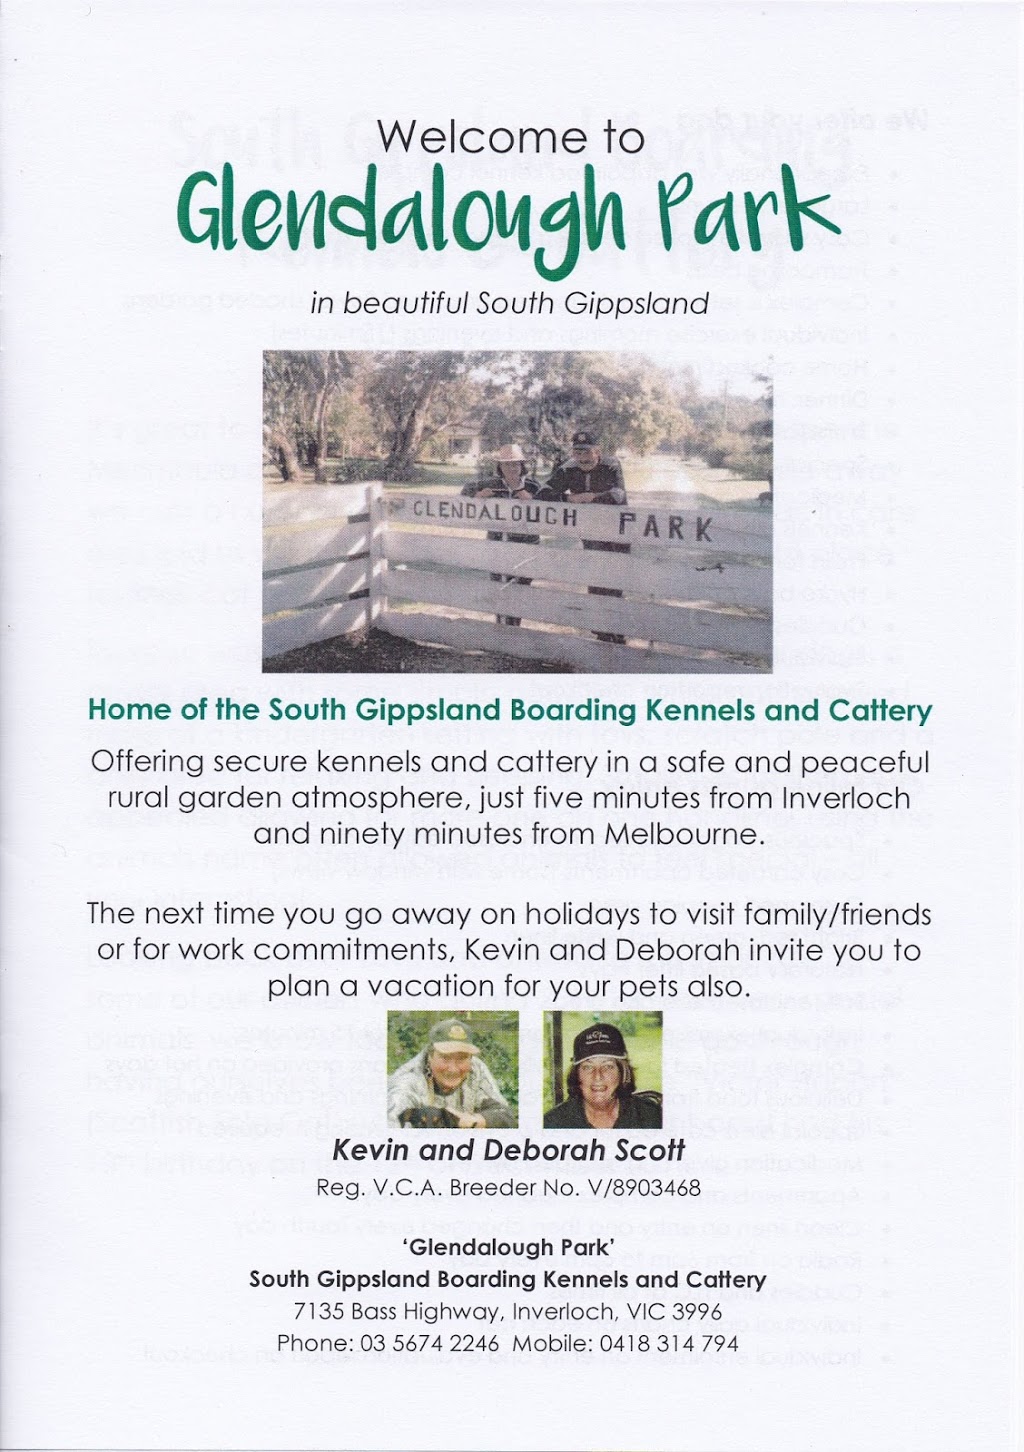 South Gippsland Boarding Kennels & Cattery | 7135 Bass Hwy, Inverloch VIC 3996, Australia | Phone: (03) 5674 2246